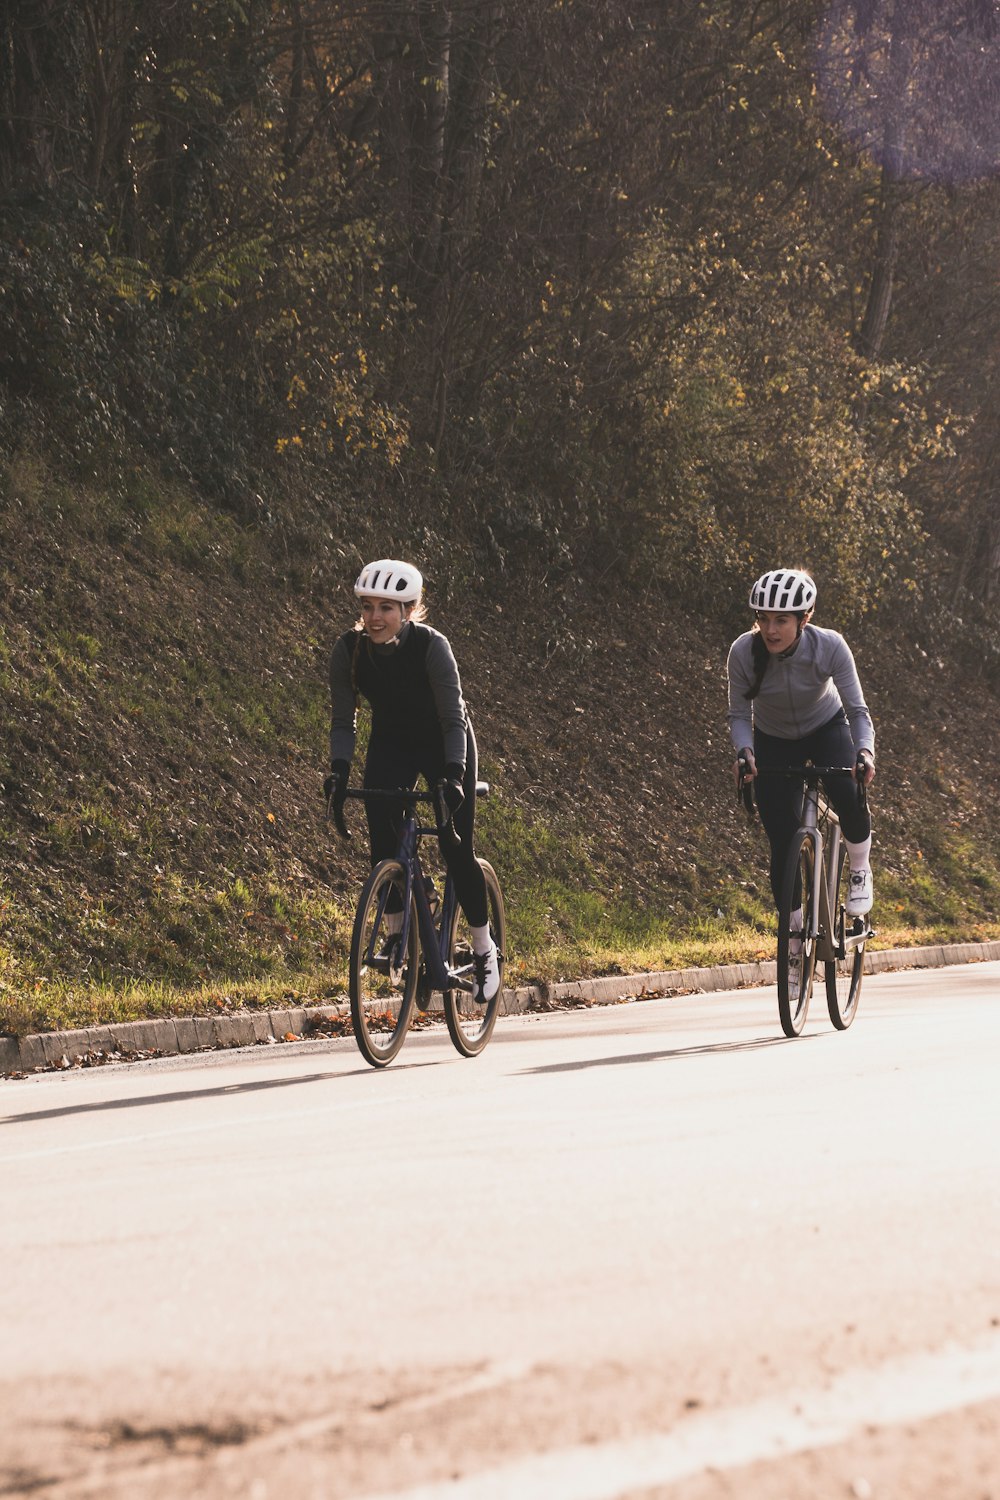 two people riding on bike uphill